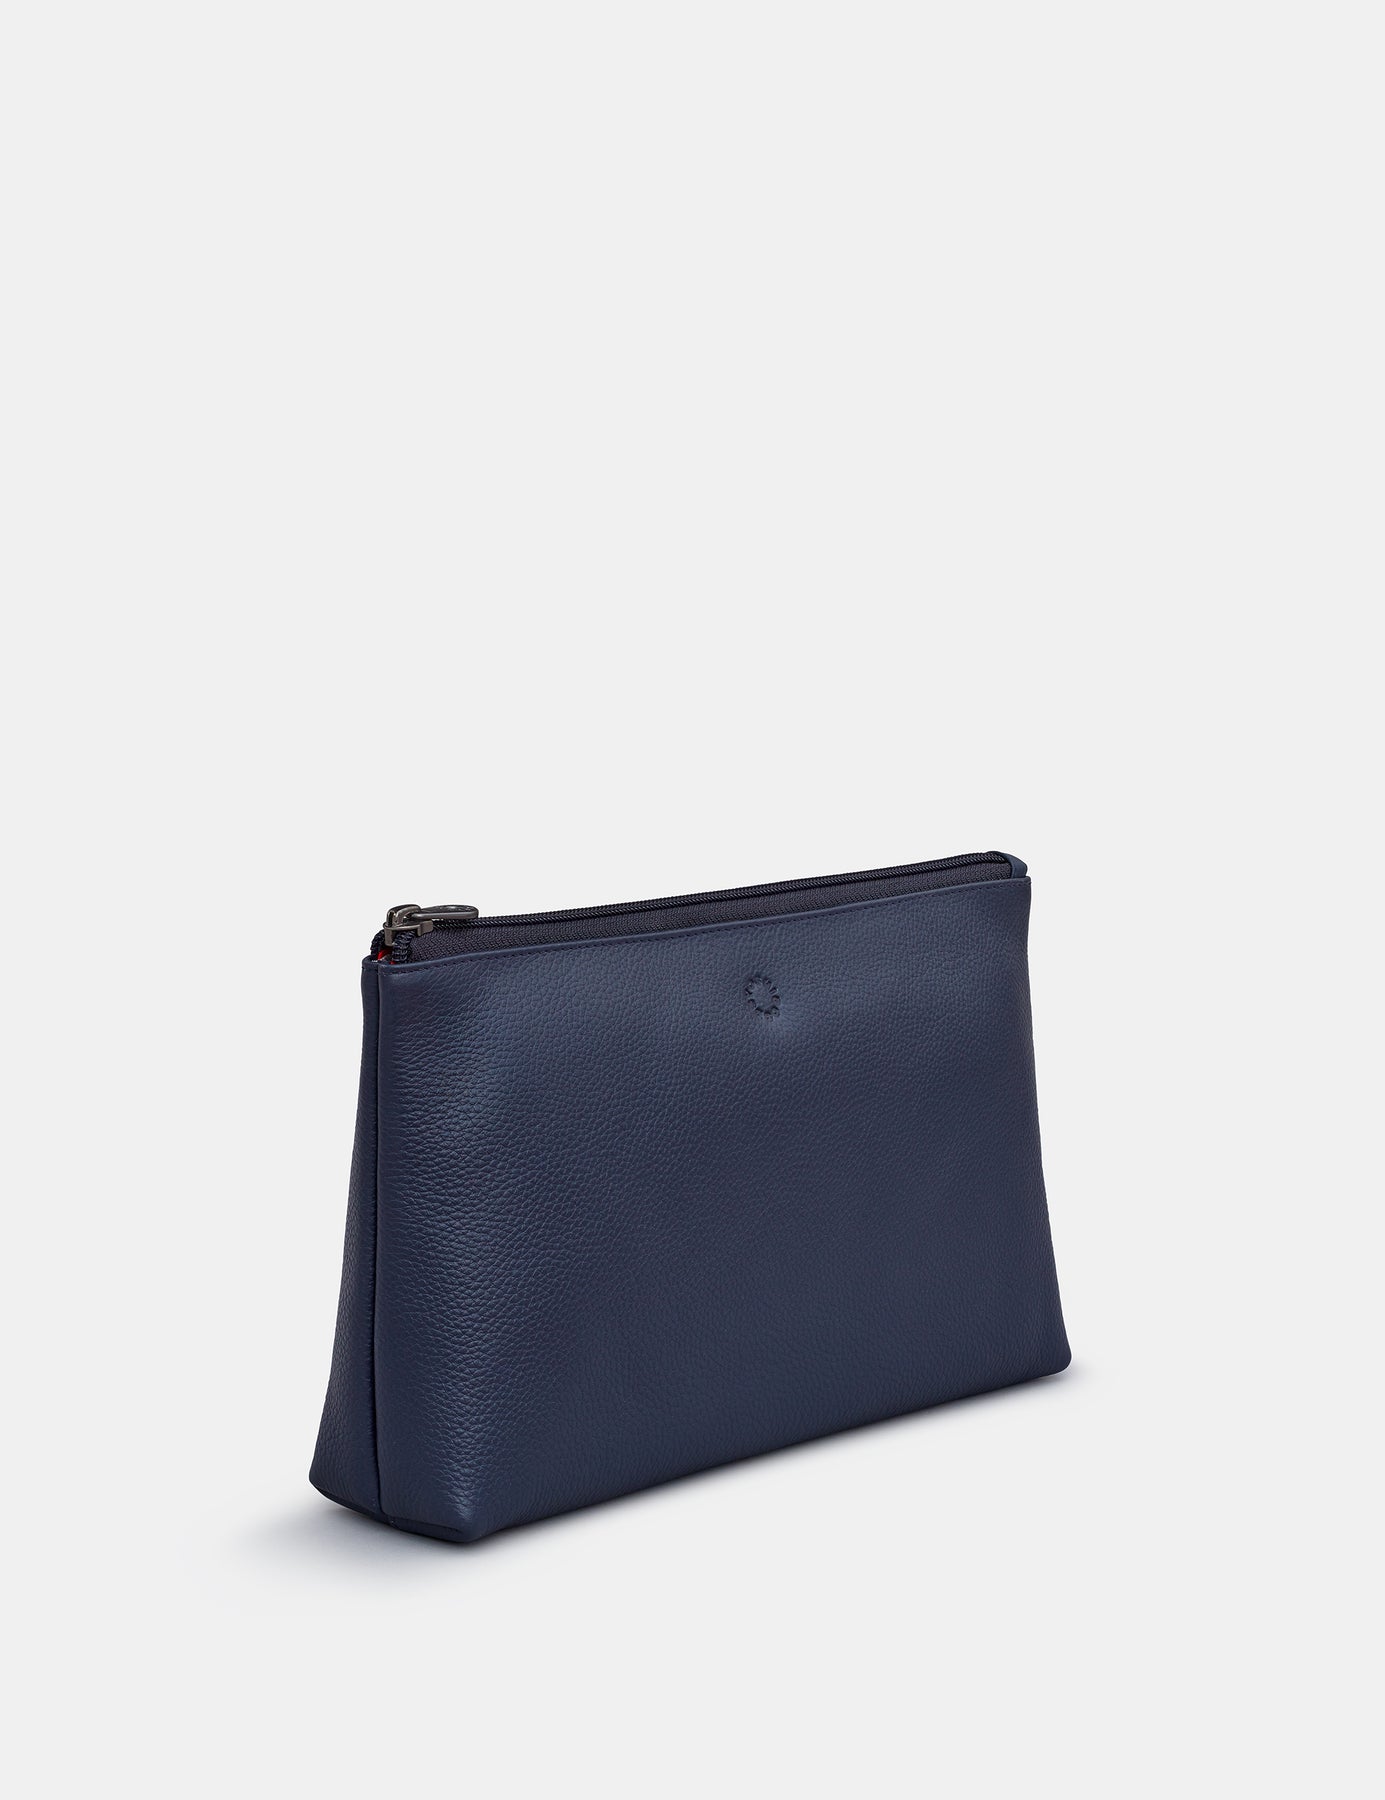 Hammitt Women's Tony Small Leather Purse With Strap Indigo Navy/Brushe —  Sports by Sager